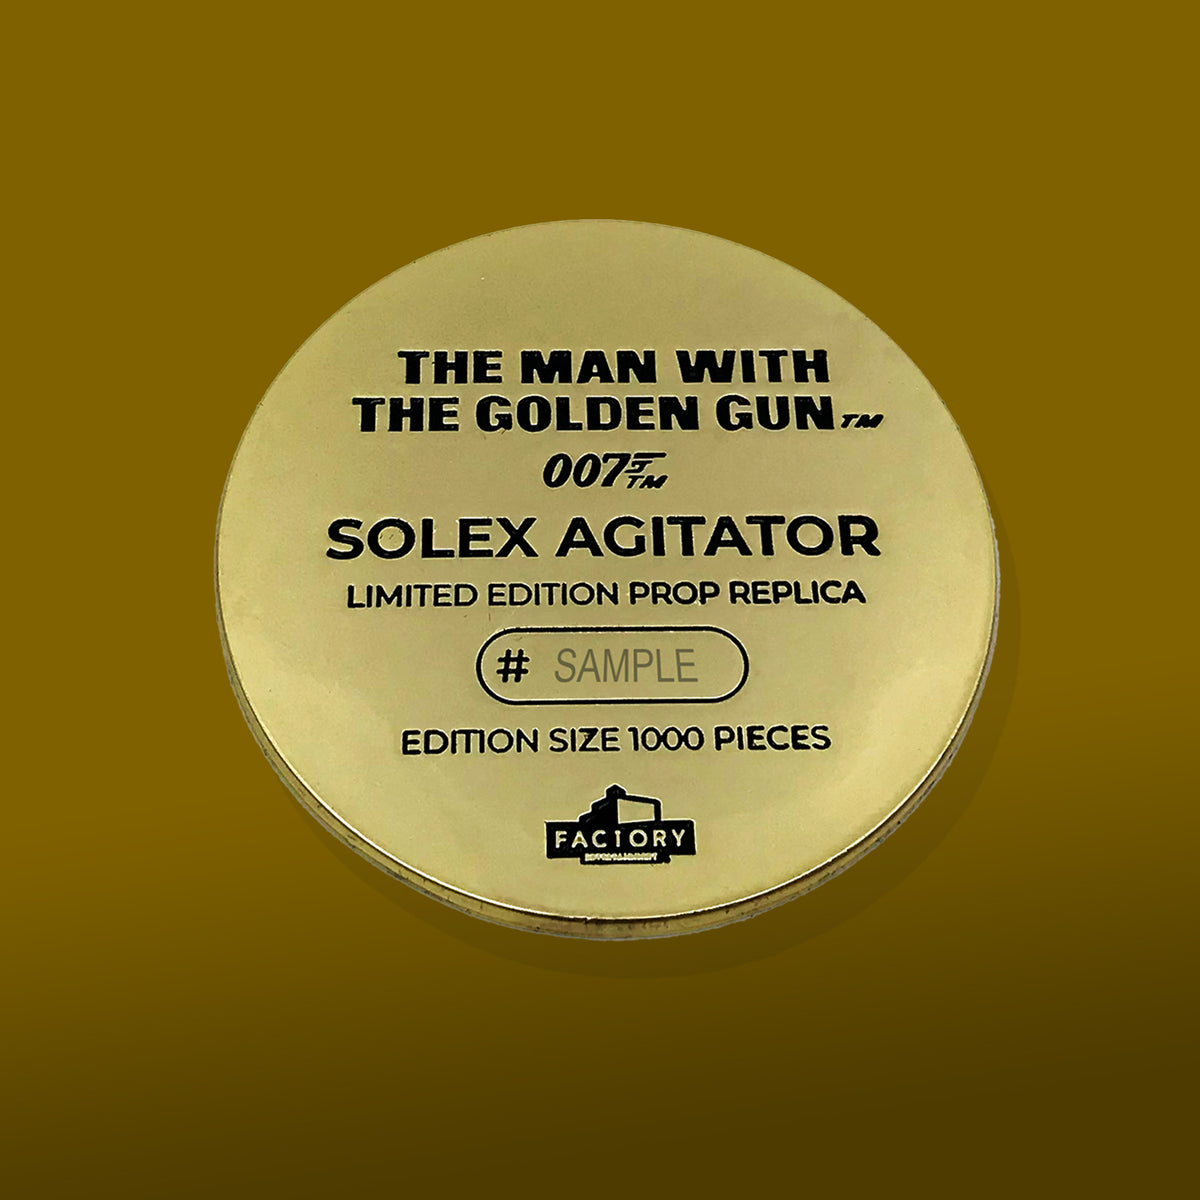 James Bond Solex Agitator Prop Replica - The Man With The Golden Gun Numbered Edition (Pre-order)